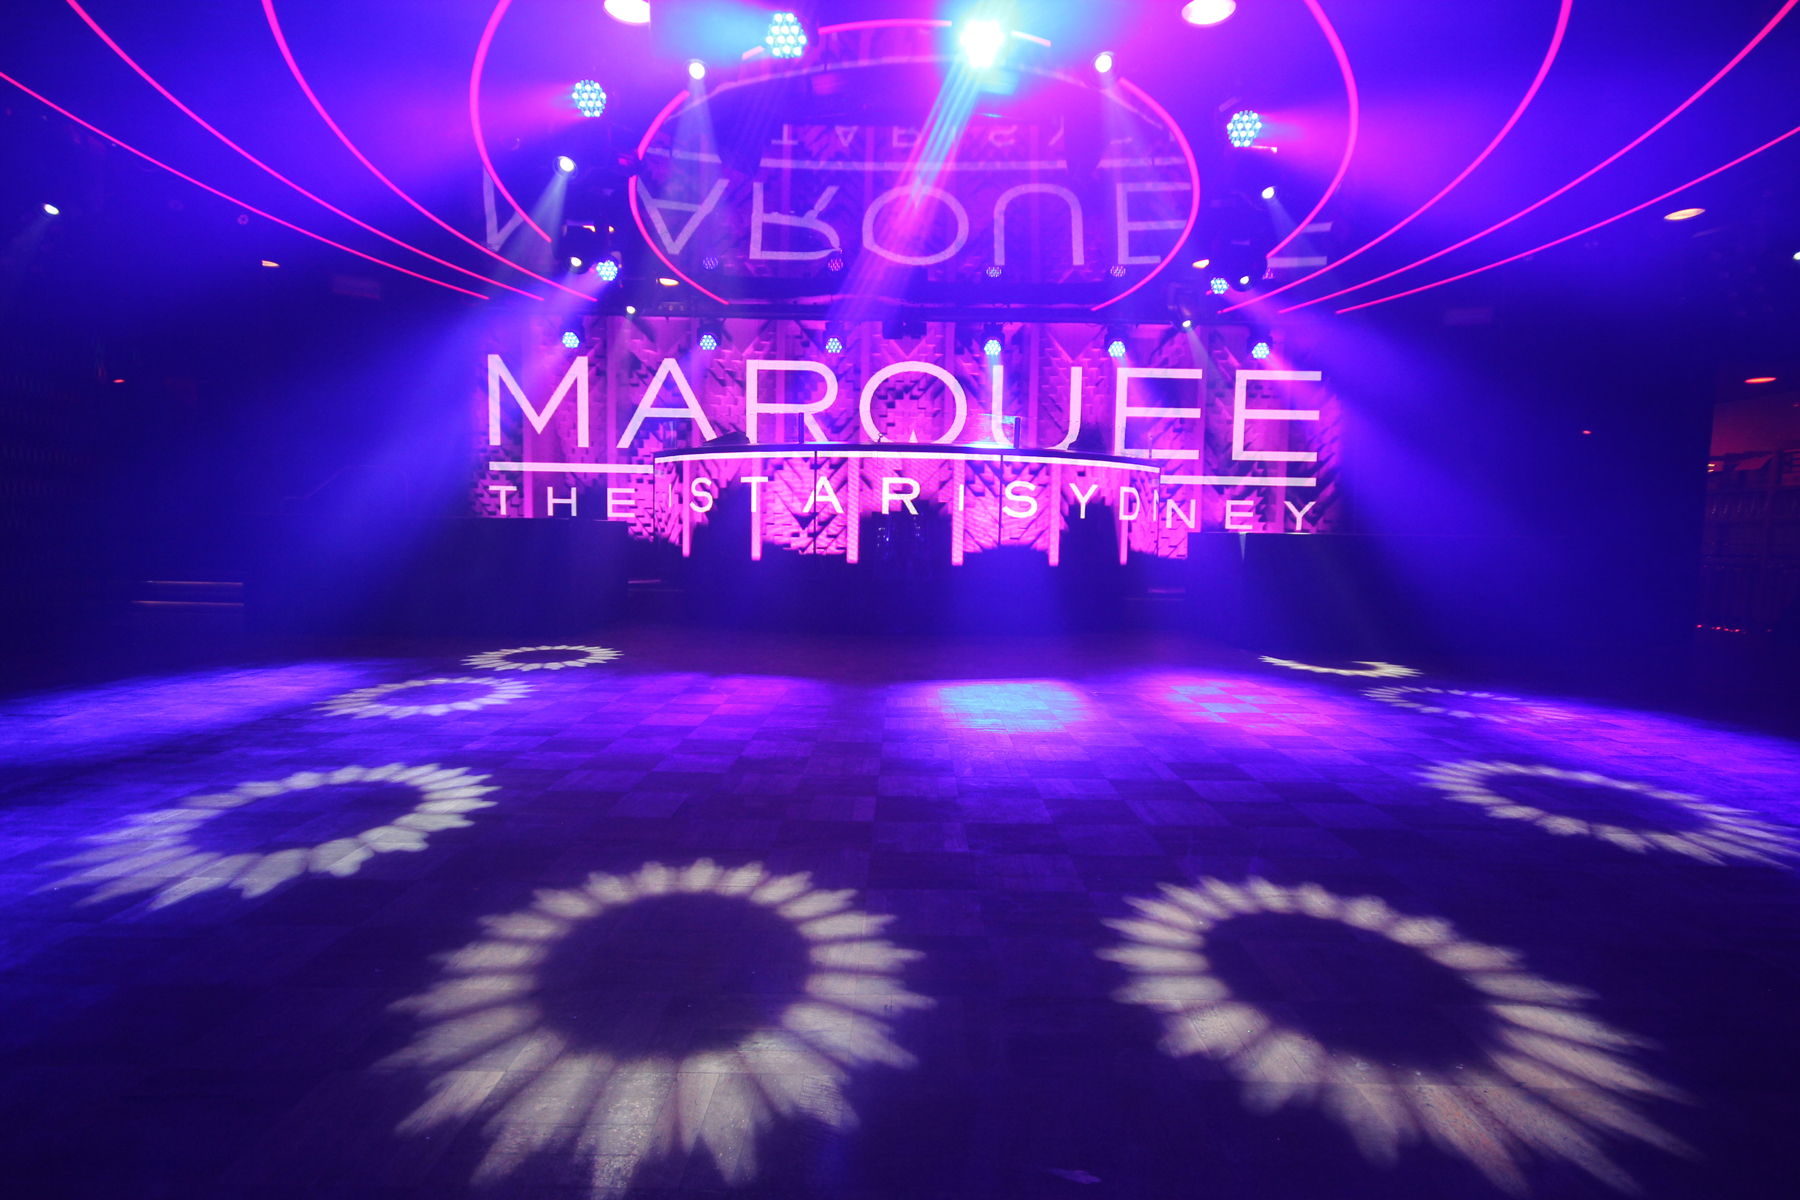 Marquee Club The Star Sydney Curved LED Screen Custom Event Theatre Lighting